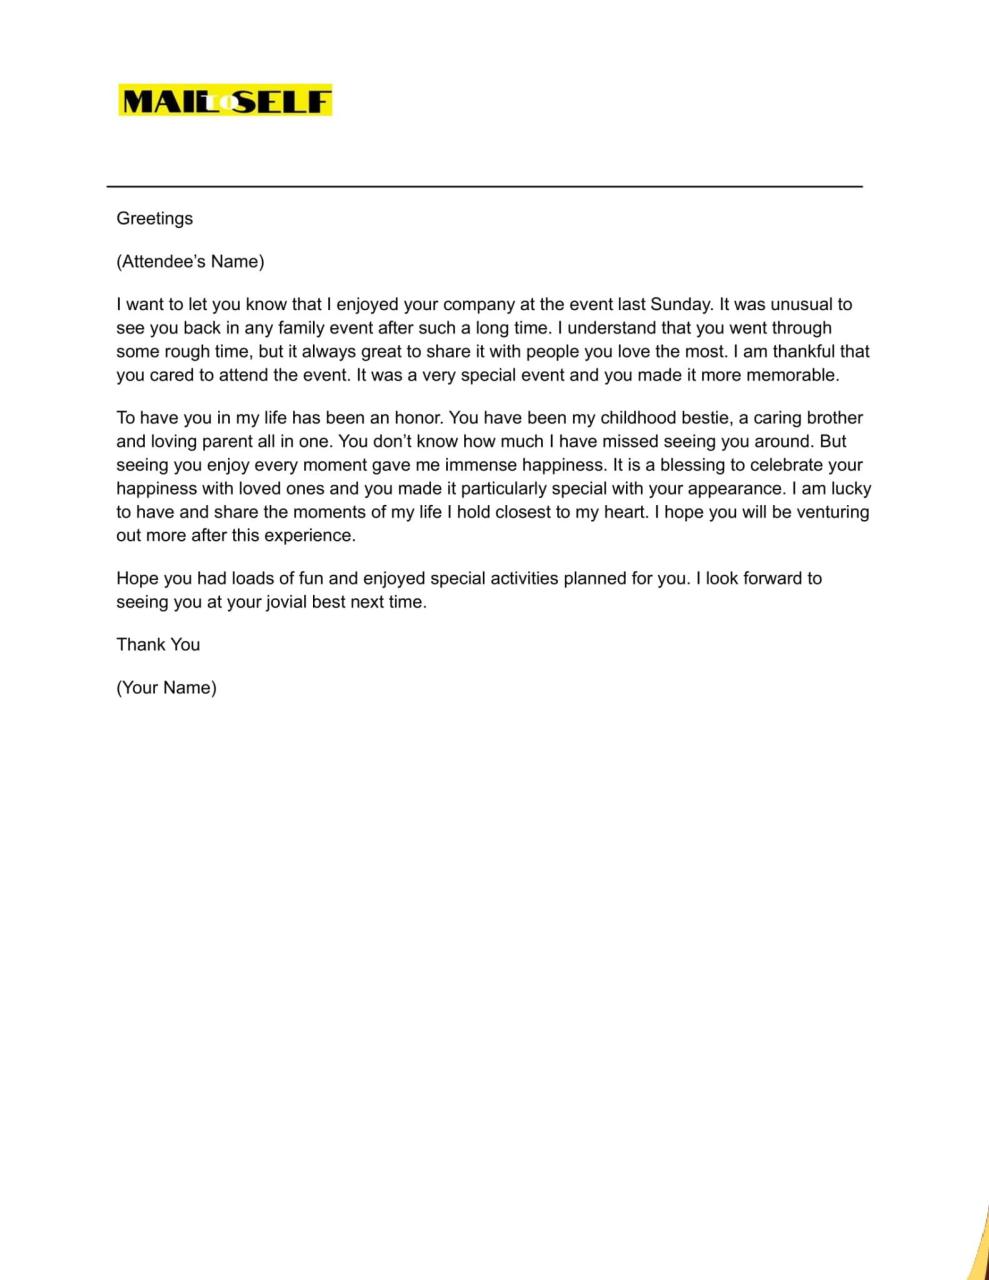 Thank You Letter After Event Attendance How To, Templates & Examples Mail To Self